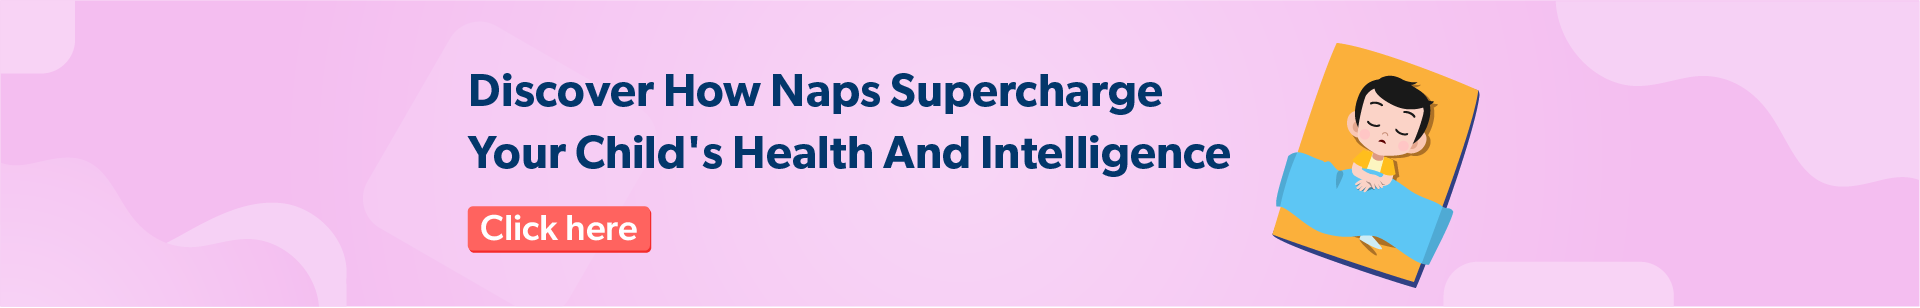 Discover How Naps Supercharge Your Child's Health And Intelligence